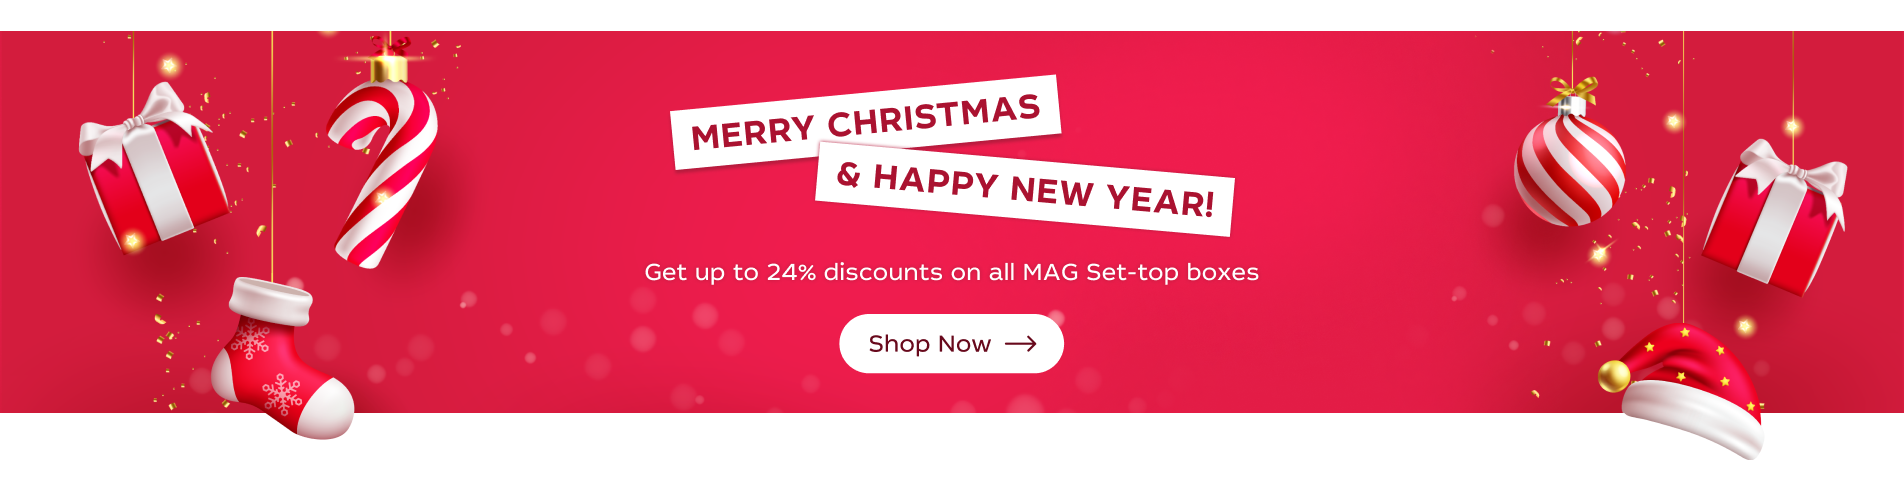 Celebrate Christmas with MAG Boxes - Get up to 24% Off in All Our Stores!